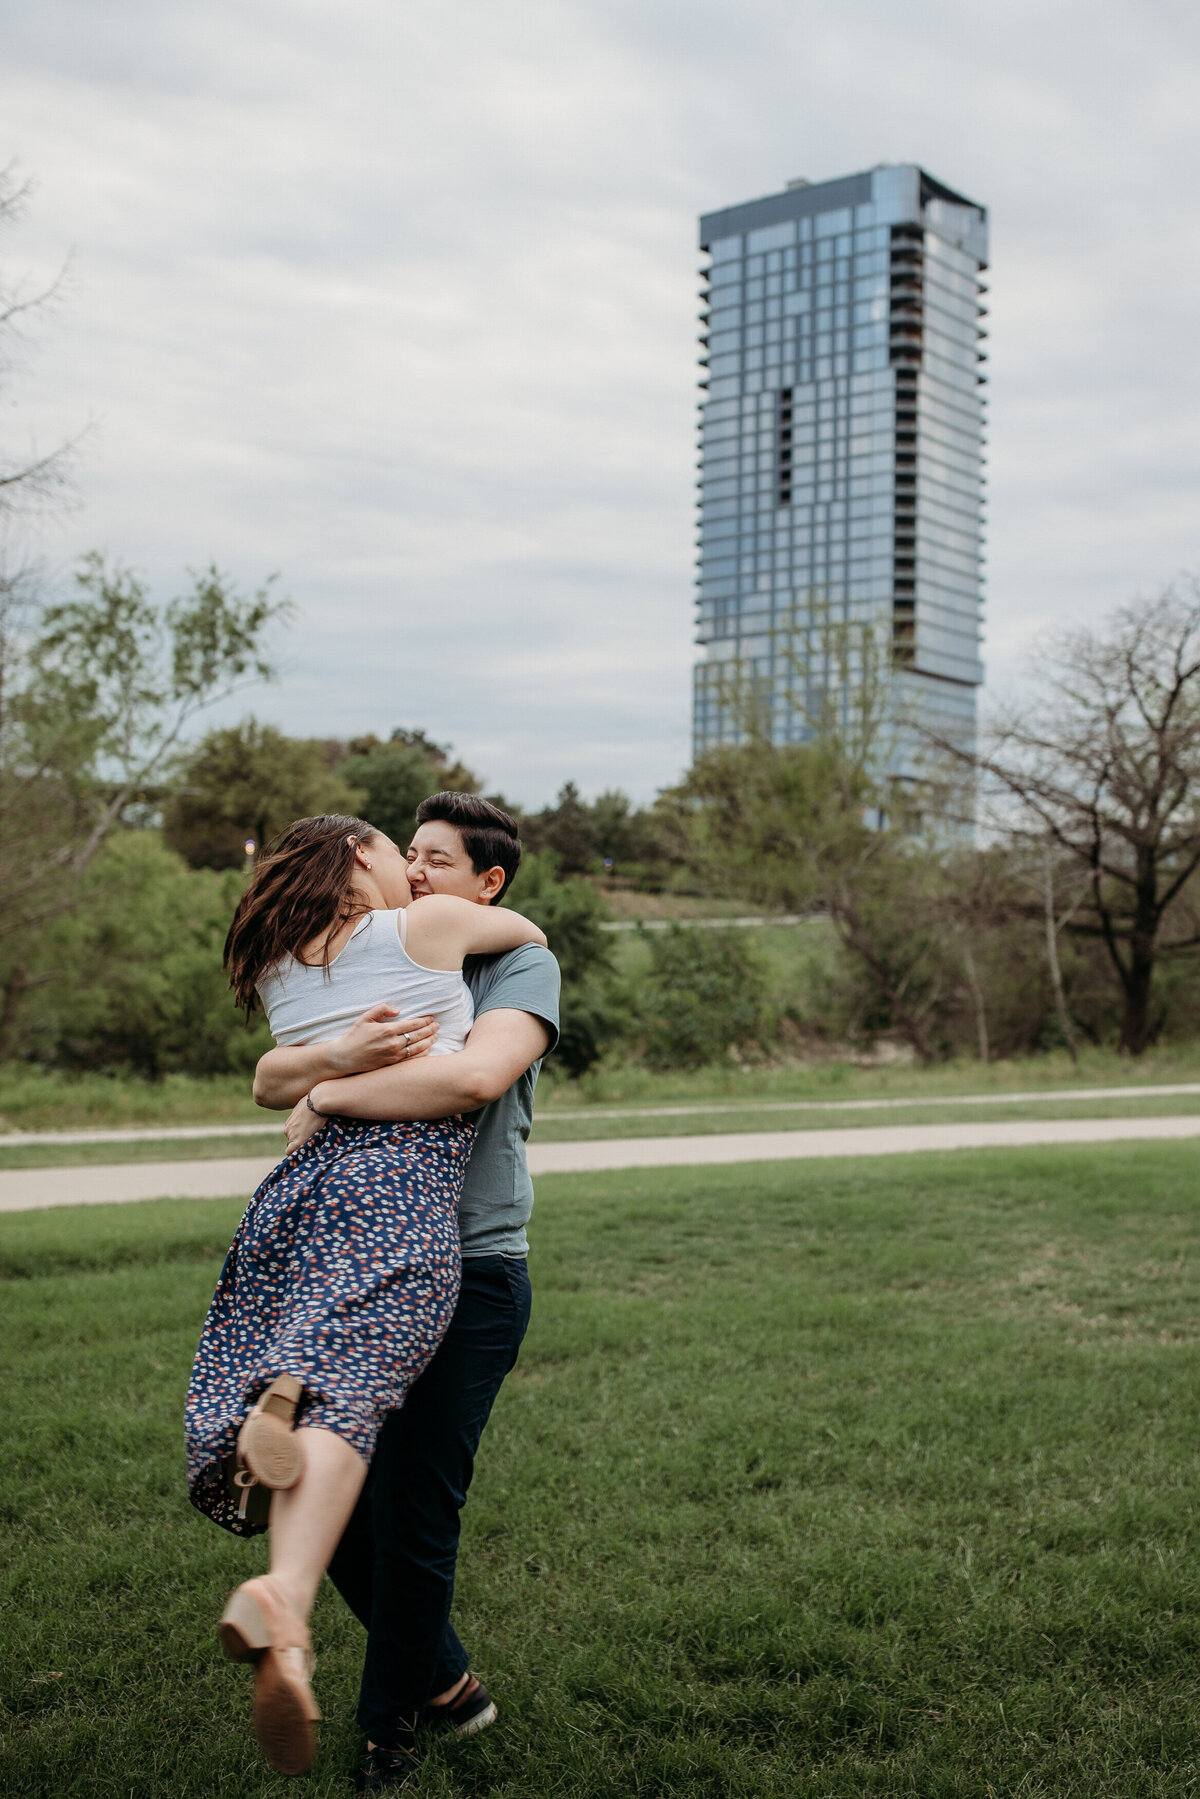 A couple in a joyful embrace, with one person lifting the other, set against a city park backdrop